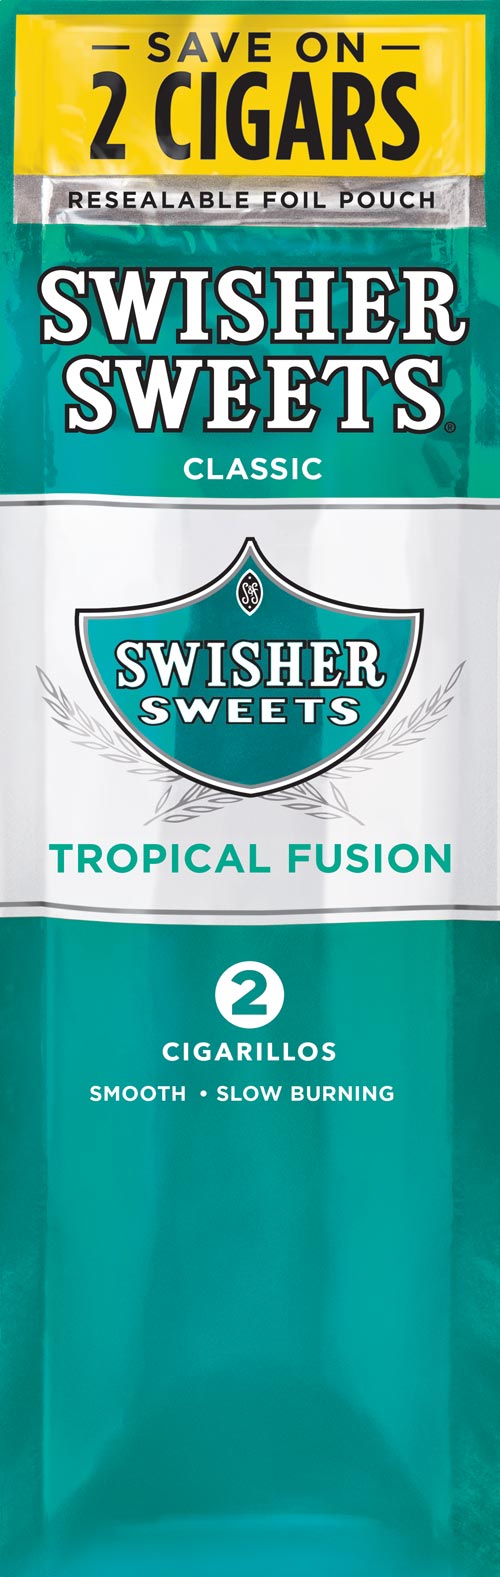 Swisher Sweets Cigarillos - Tropical Fusion